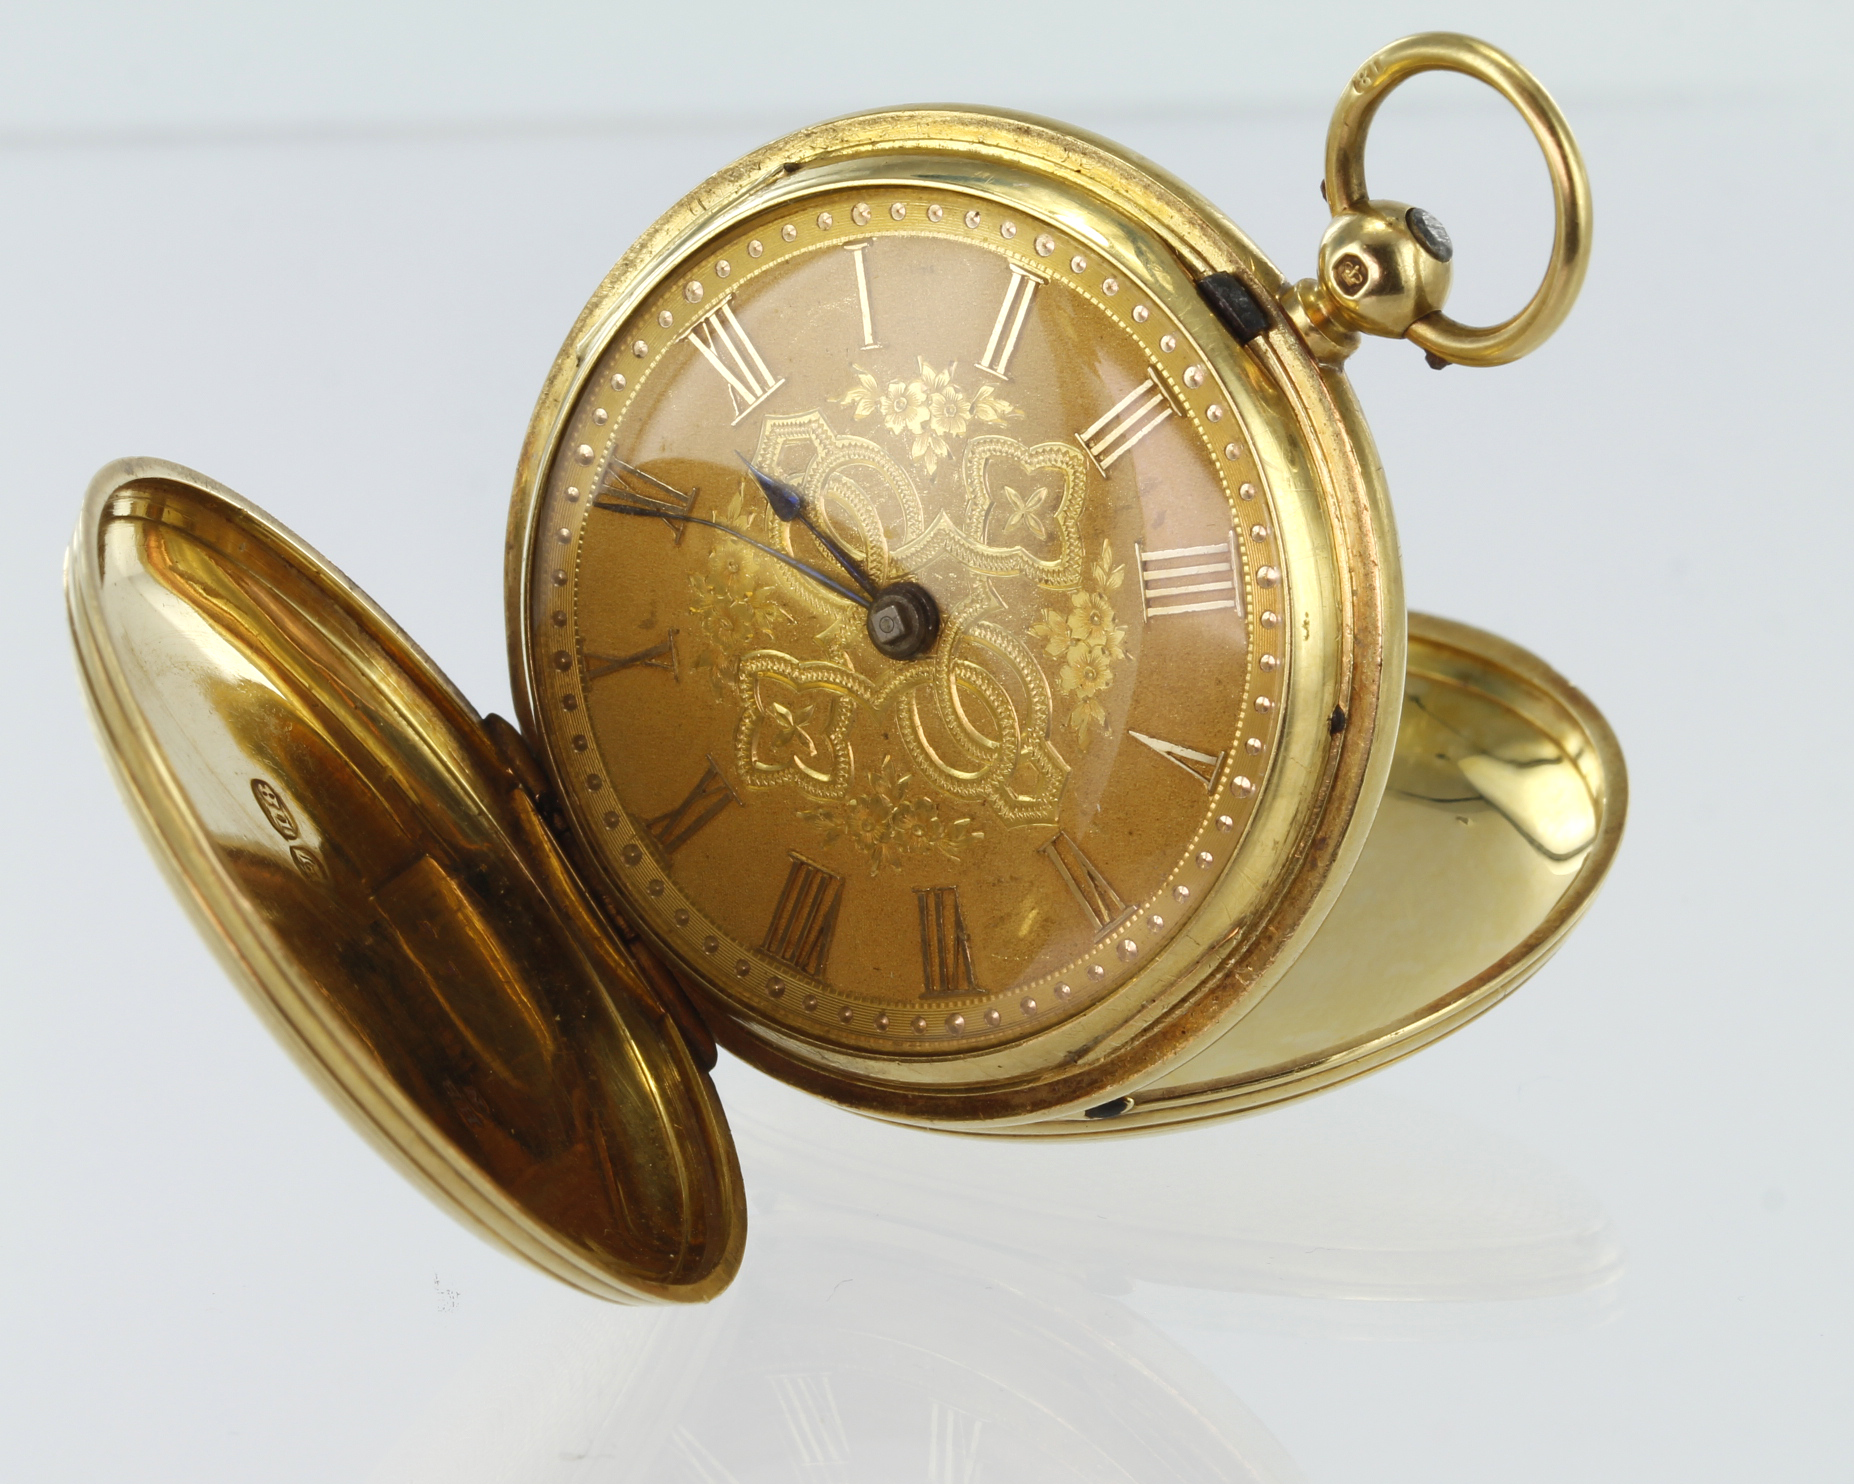 Mid-size 18ct (hallmarked London 1857) full hunter pocket watch. Total weight 61.3g, approx 40mm